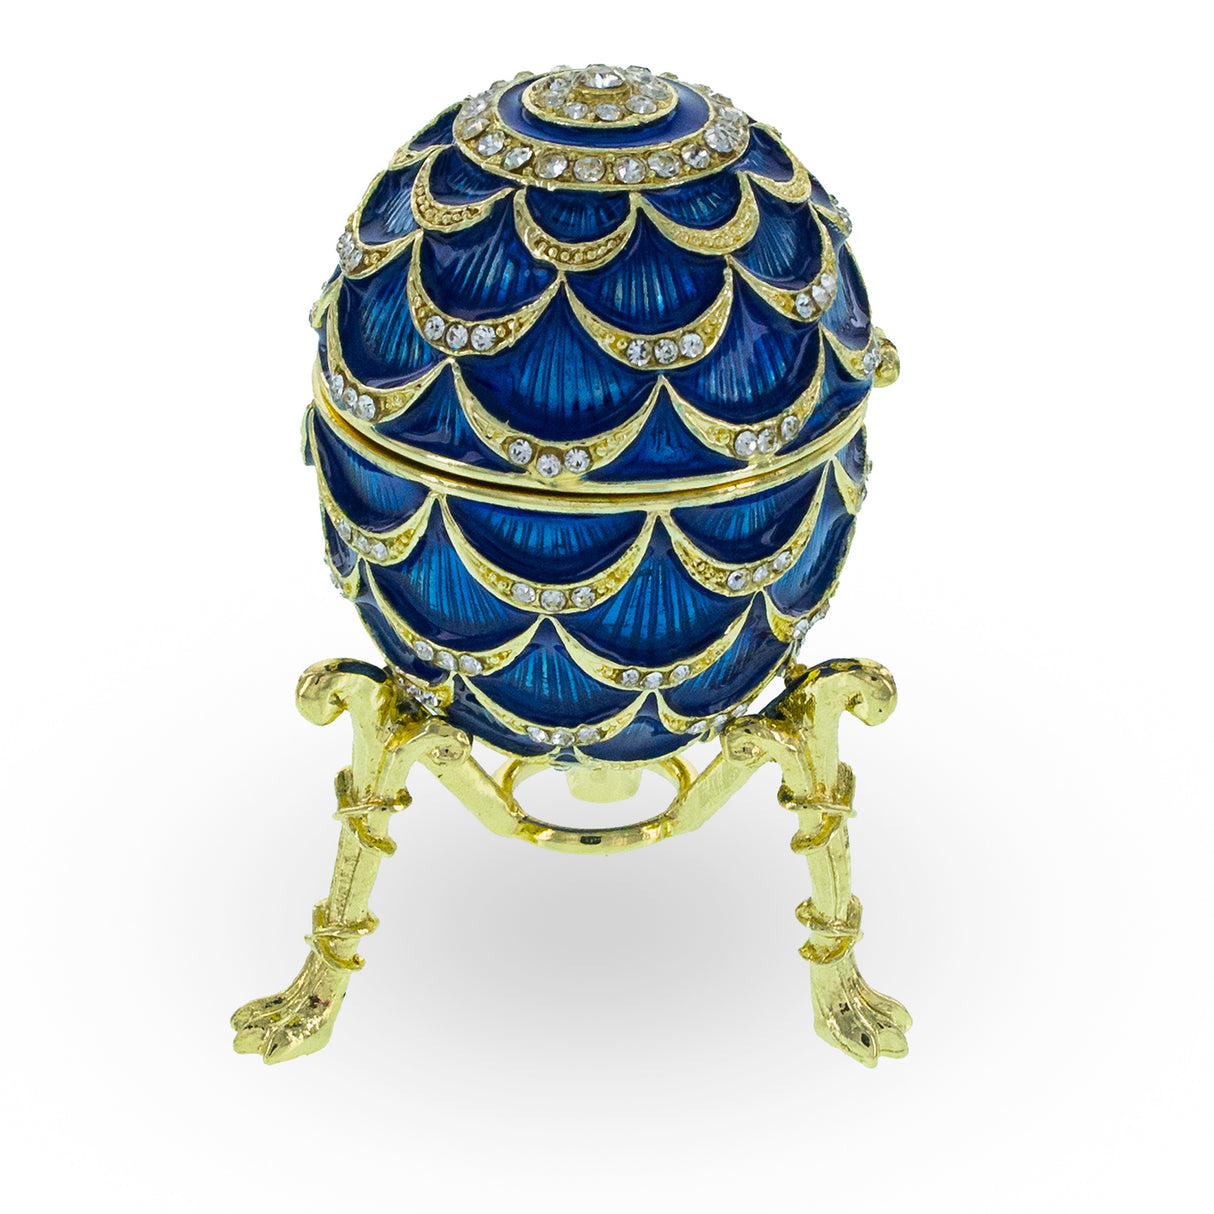 Blue Enamel Pinecone Royal Inspired Imperial Easter Egg with Clock